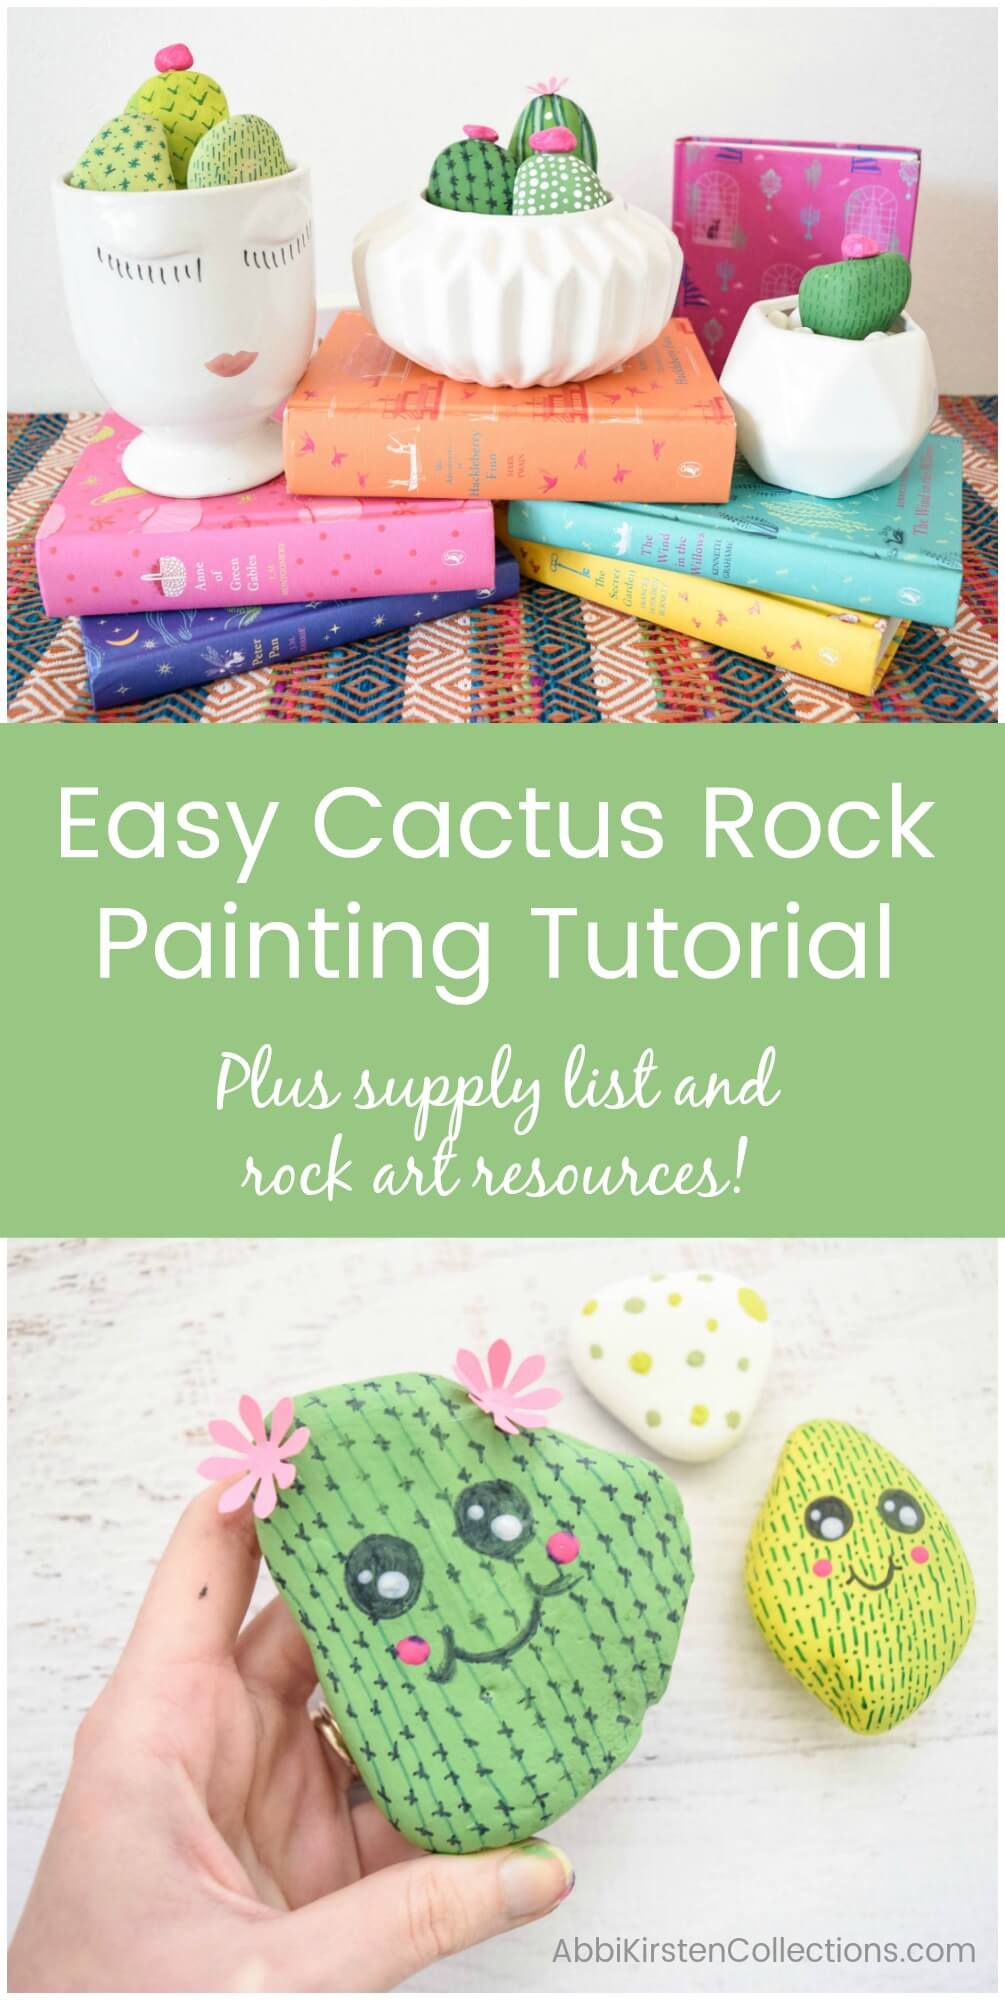 How to paint rocks. Easy Rock Painting Ideas: DIY Cactus Rock Painting Tutorial.